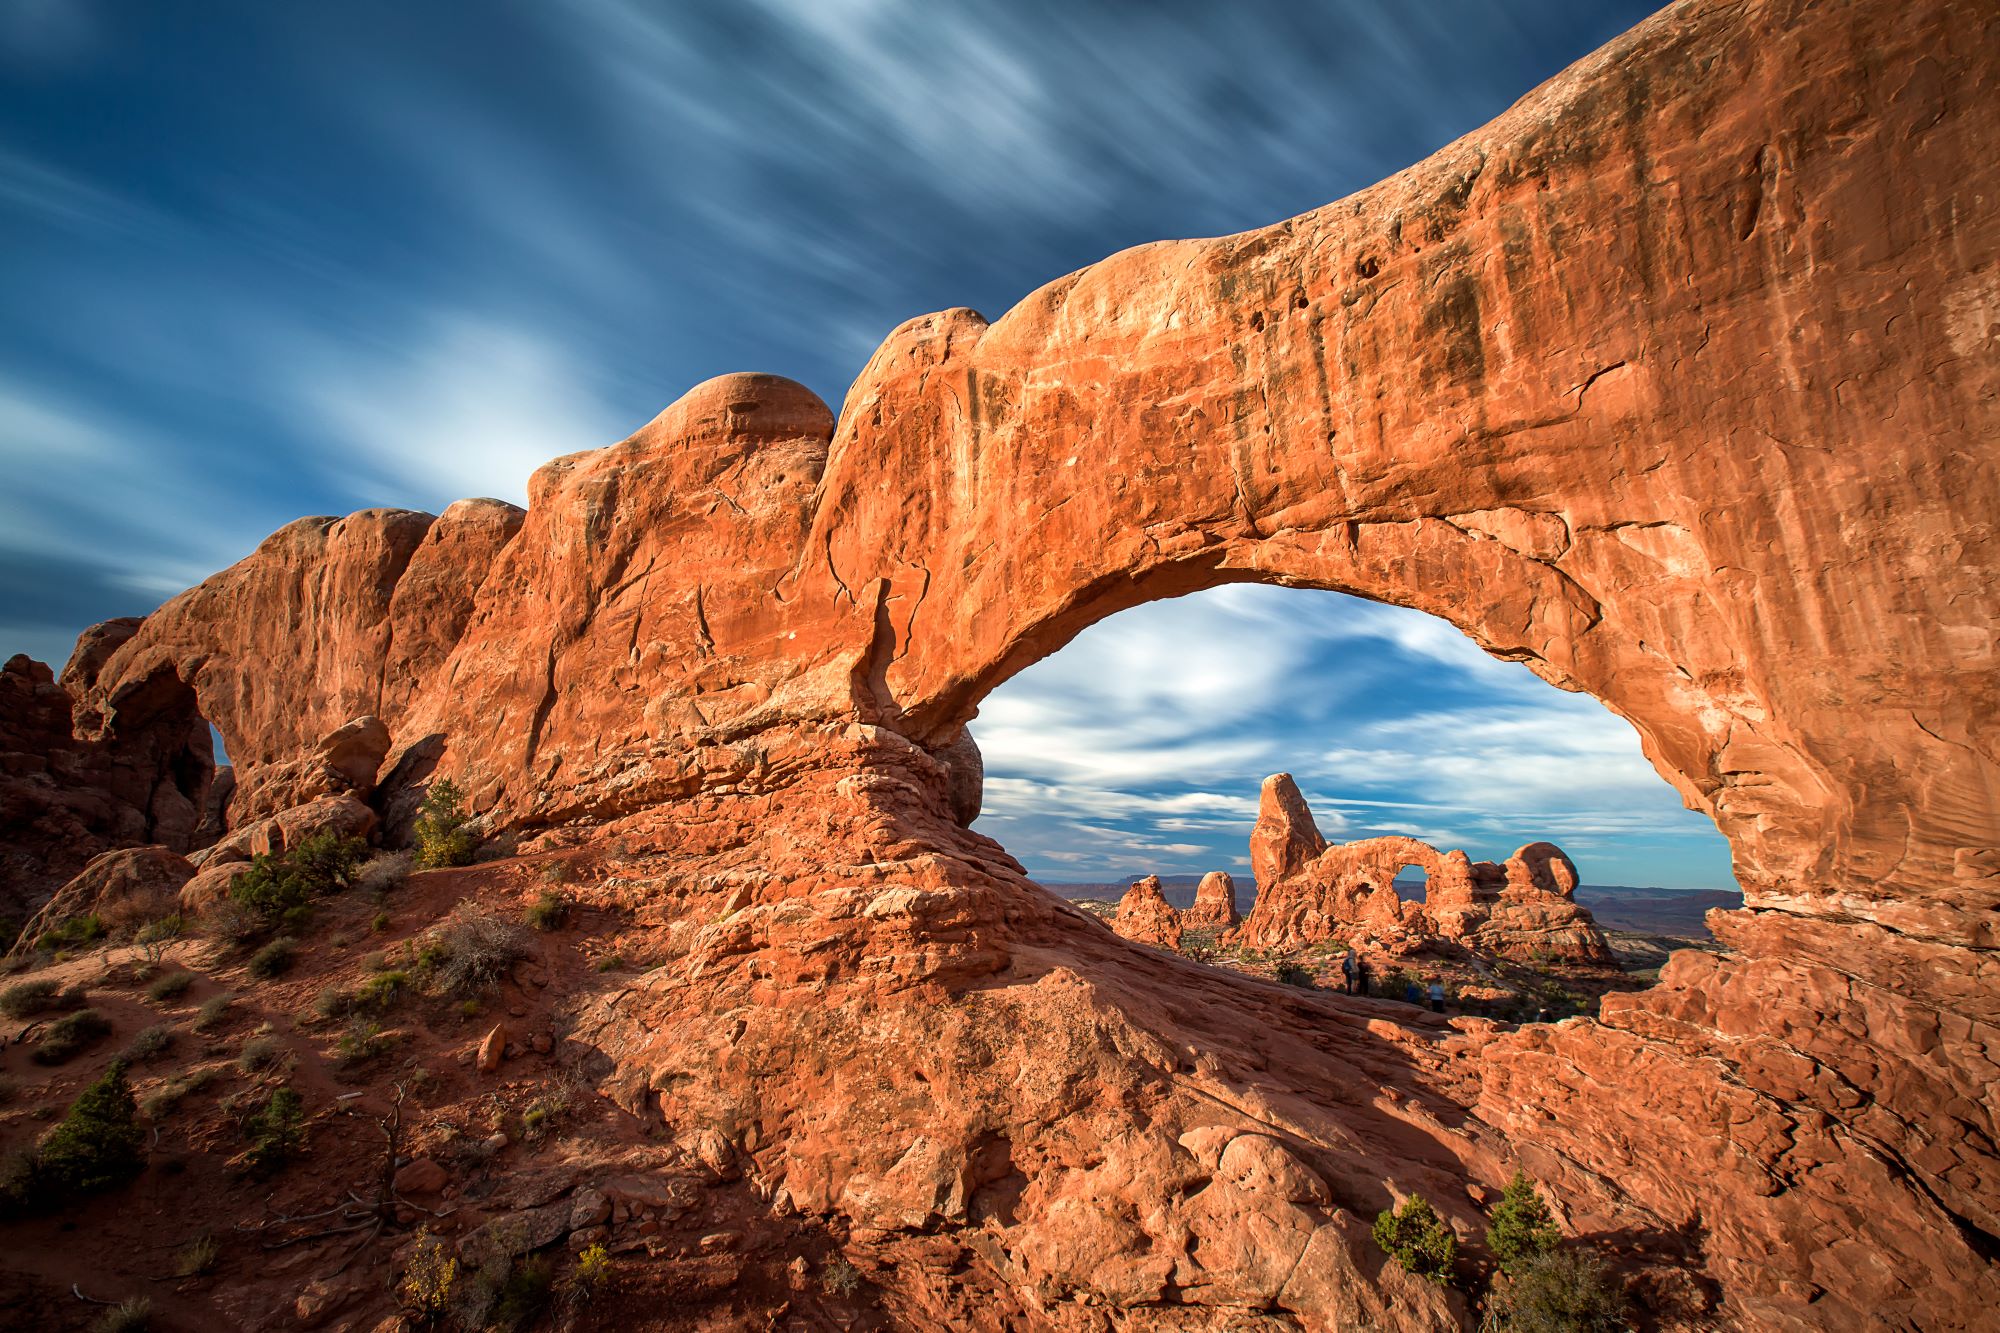 View of Turret Arch from the North Window in Arches National Park.